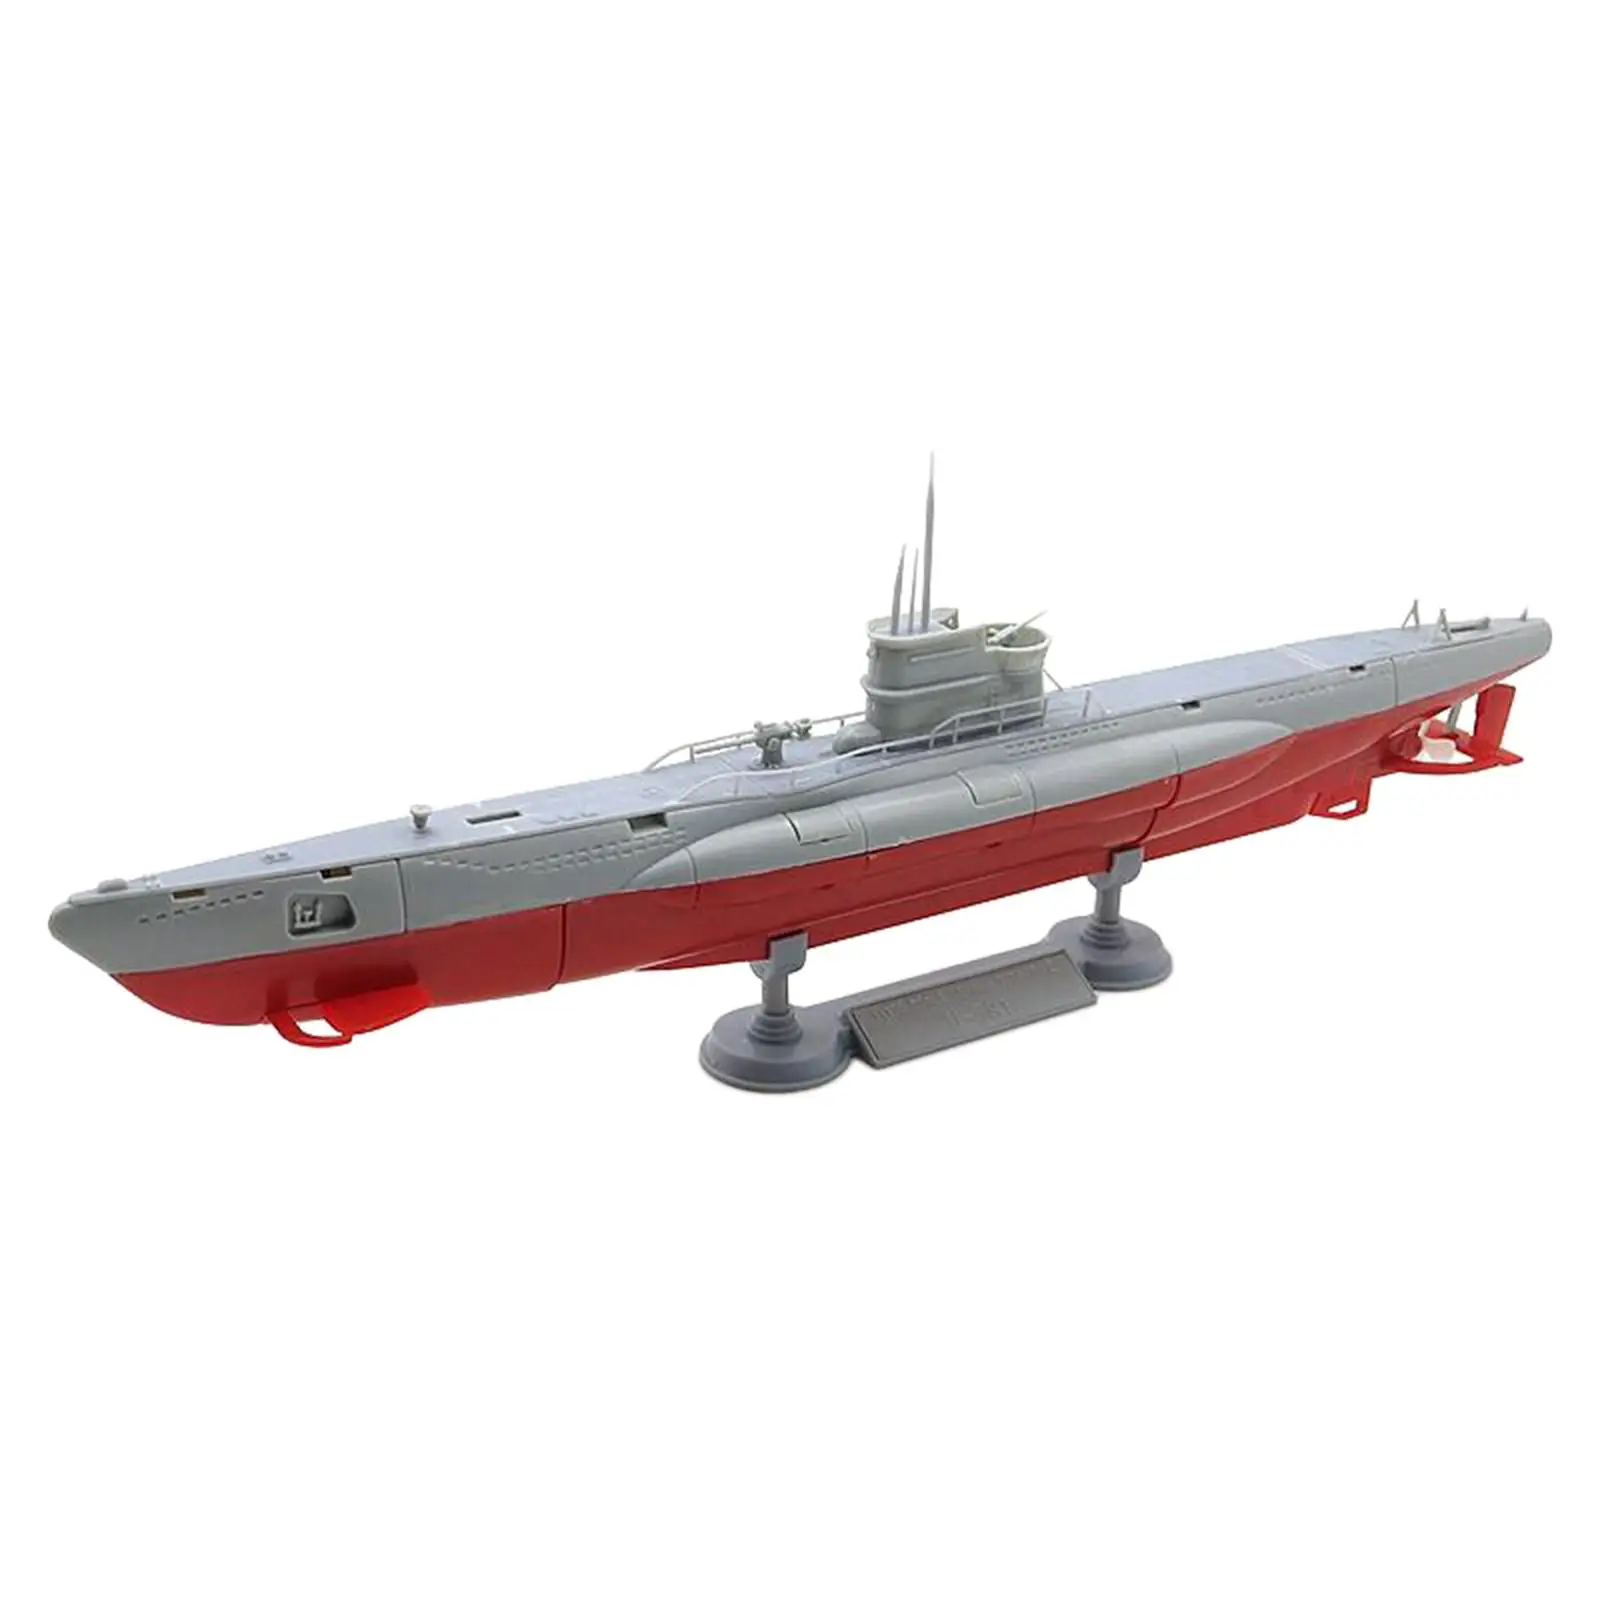 1:150 Display Ship Puzzle Simulation Desktop Decor Jigsaw Toys 4D Assembled Ship Model Warship Assembly Model for Kids Gifts